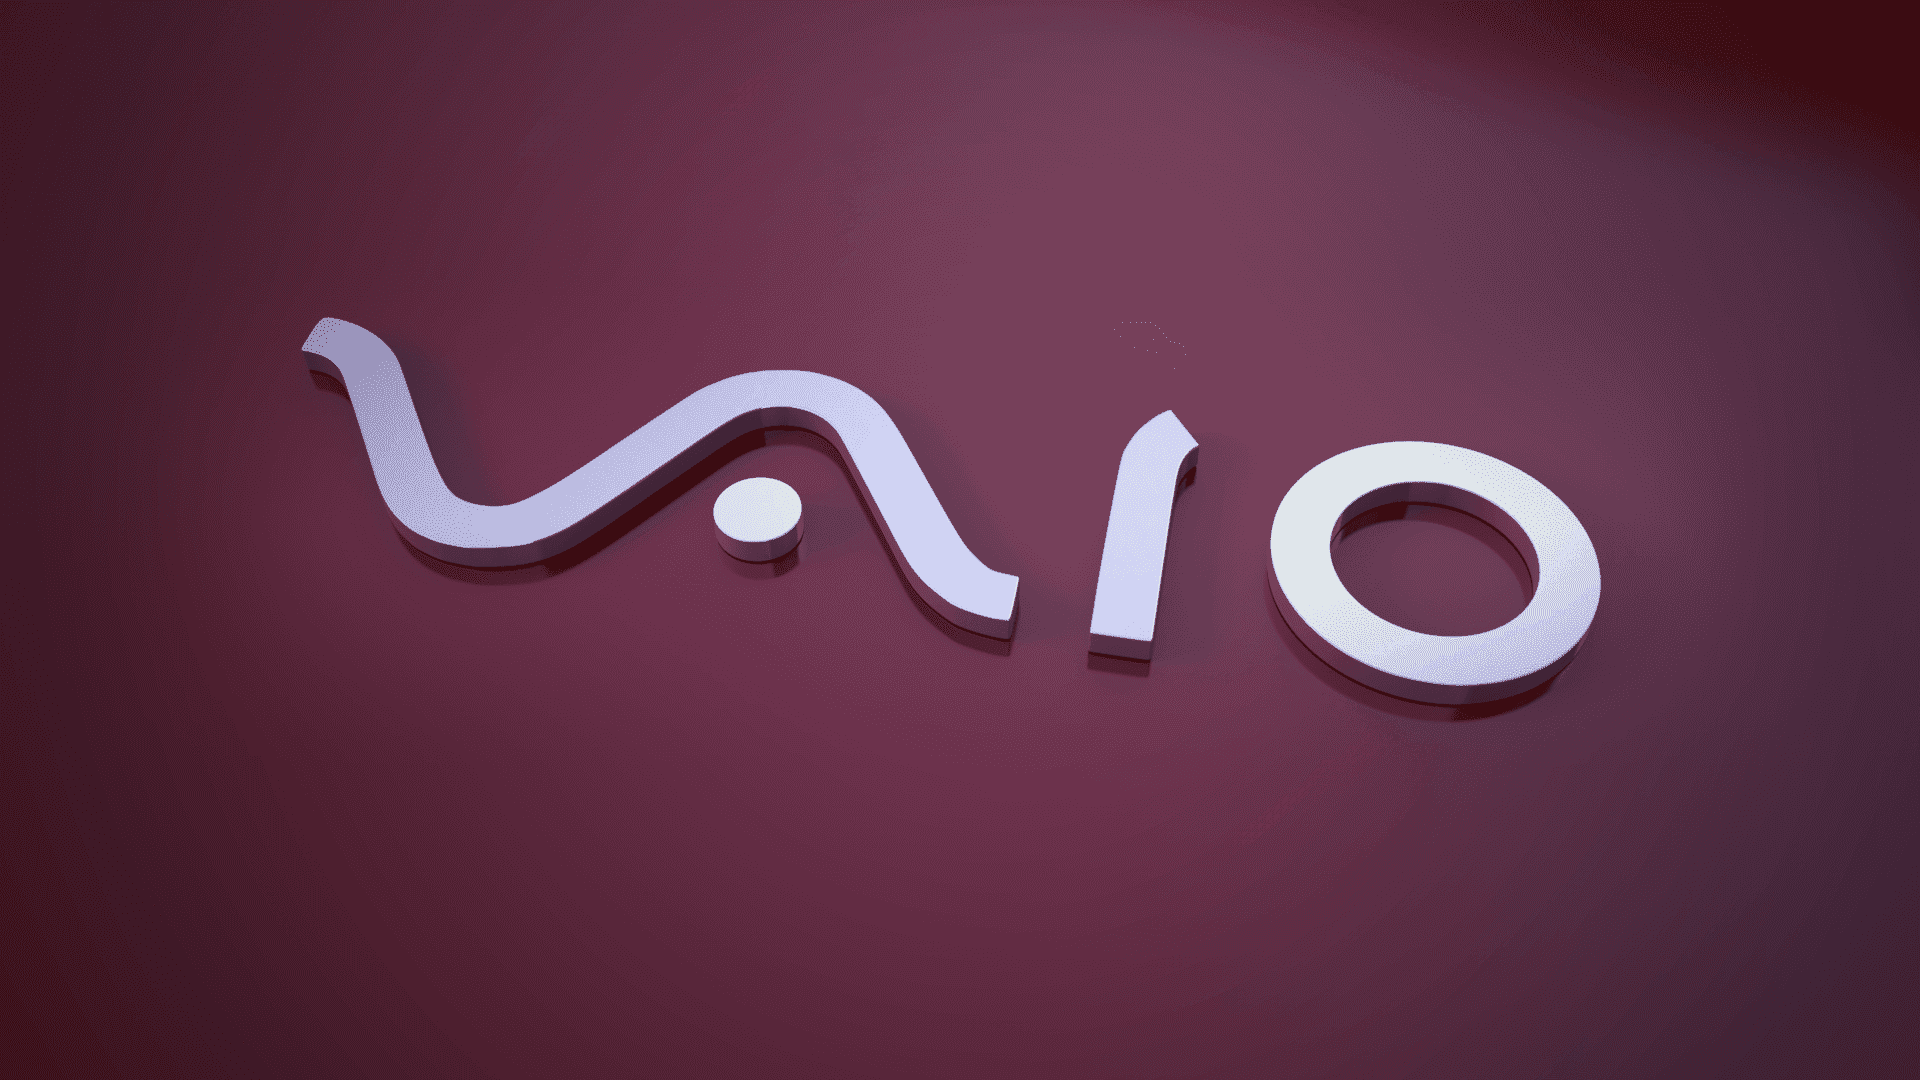 Hd Sony Vaio Wallpapers Vaio Backgrounds For Free Download